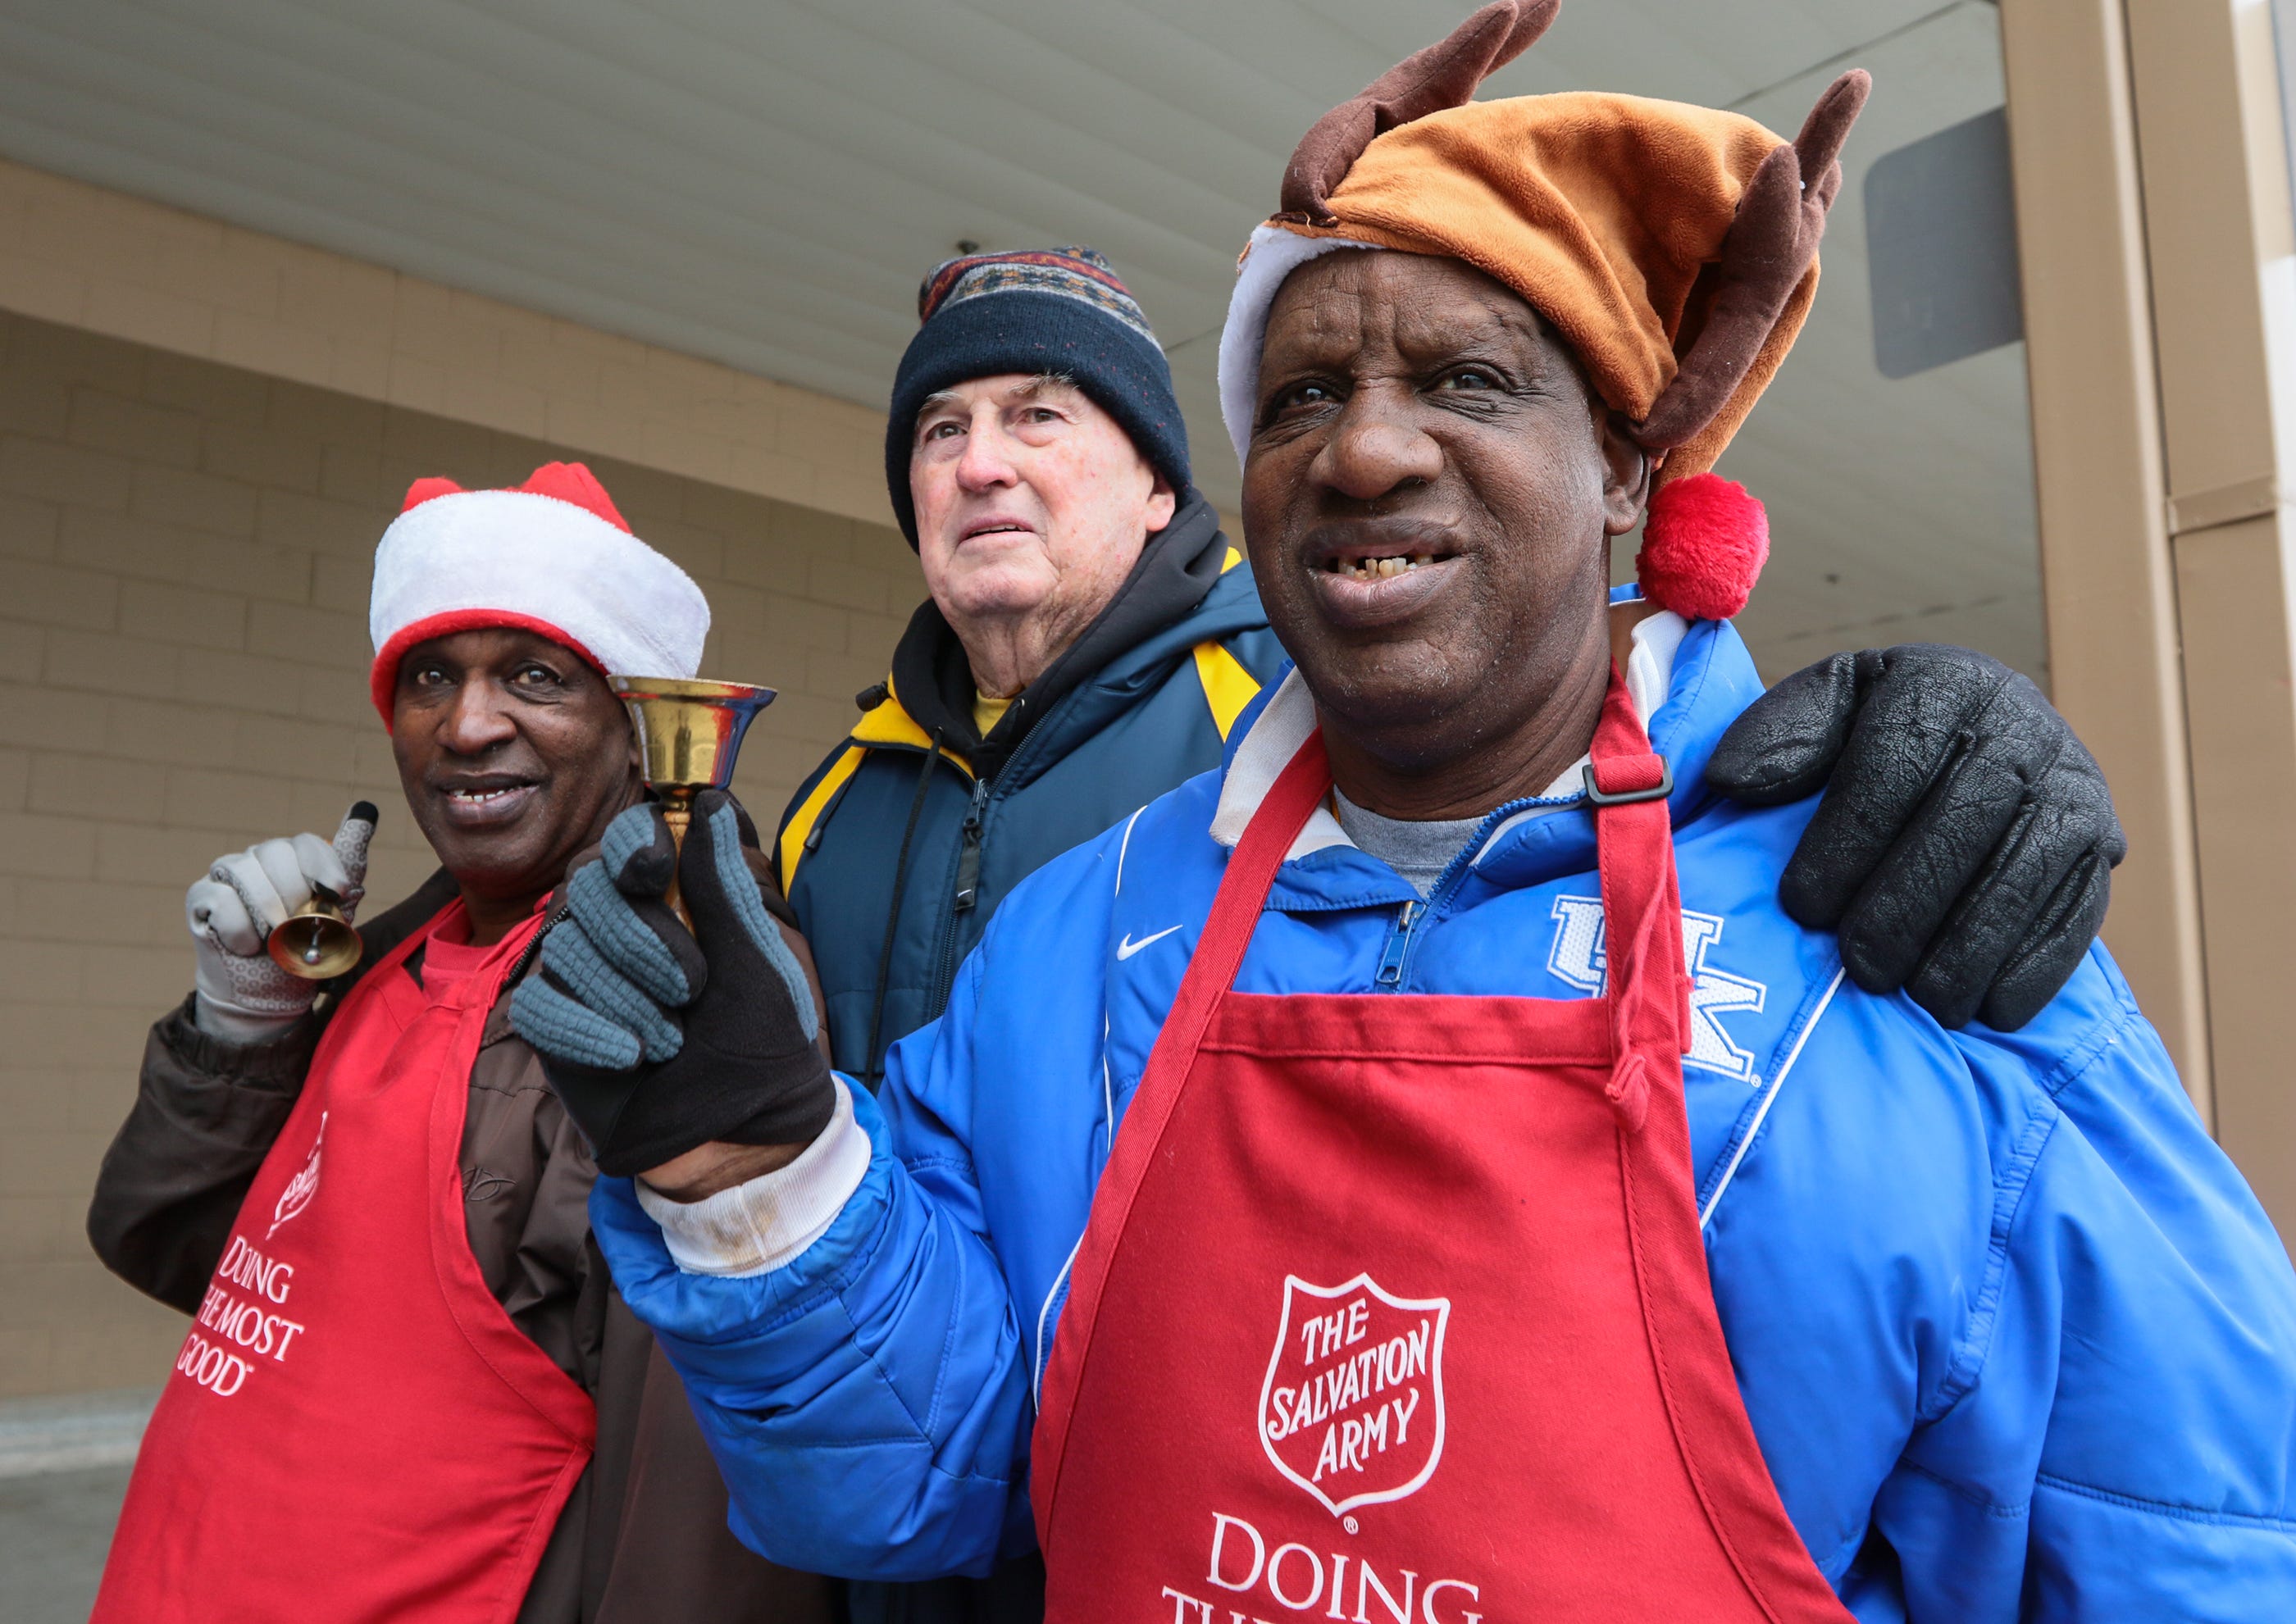 George "Cool Rock" Kennedy, left, Harold Jones, and James Robert "Radio" Kennedy of Anderson ring bells at a Salvation Army Red Kettle on Saturday at the Sam